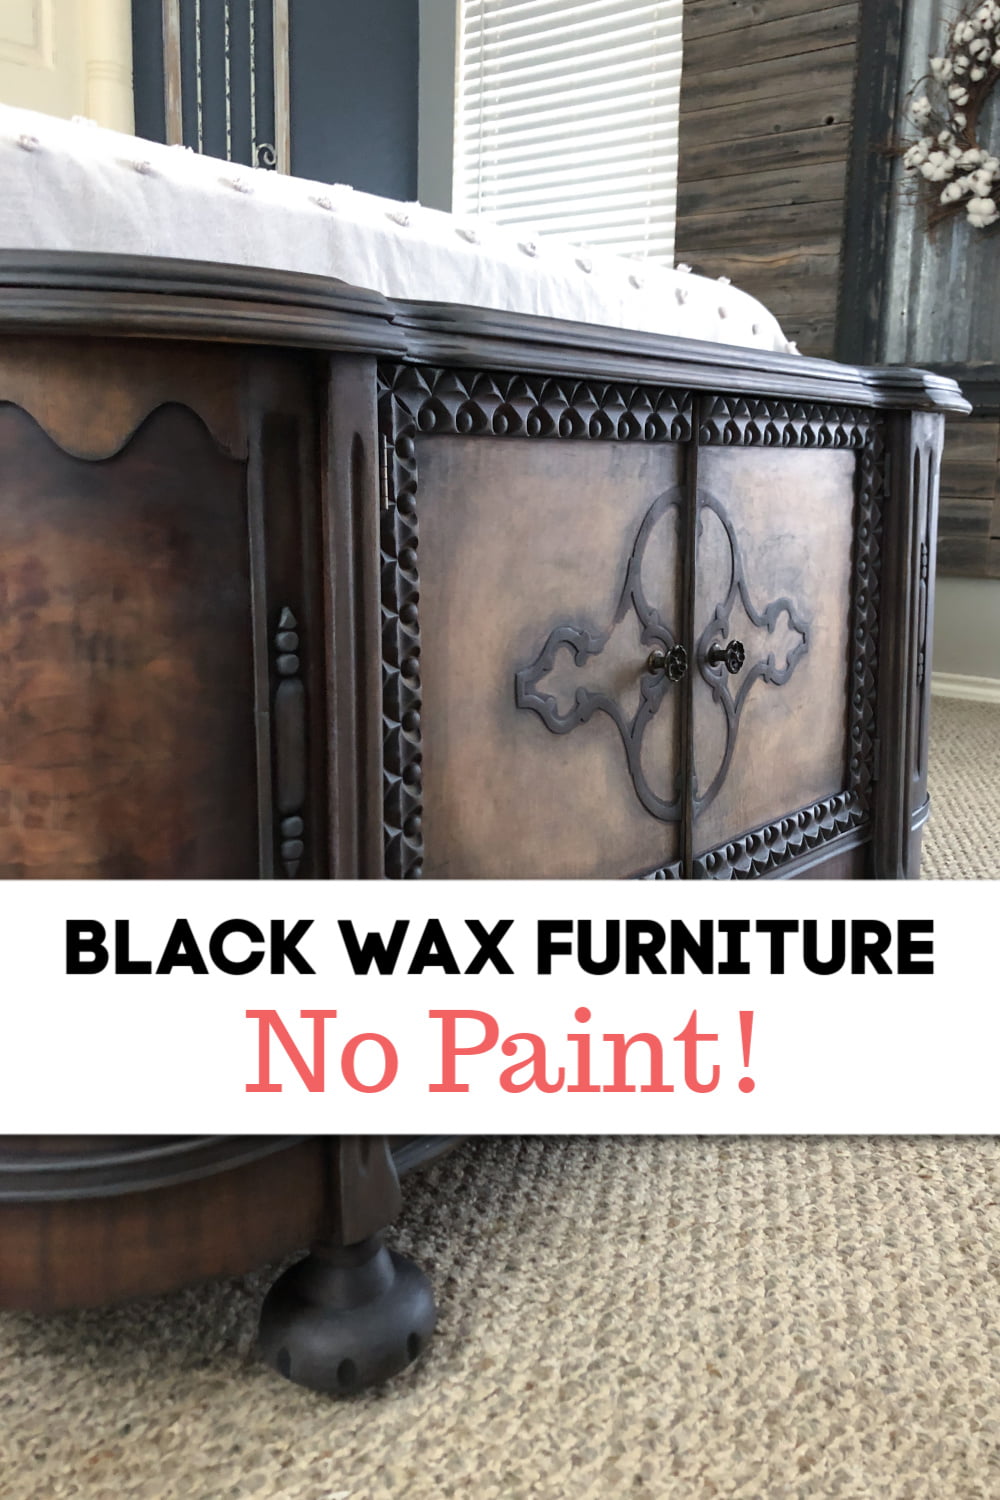 AVAILABLE! Classic ANTIQUE WAX for FURNITURE, WOODWORK, LEATHER